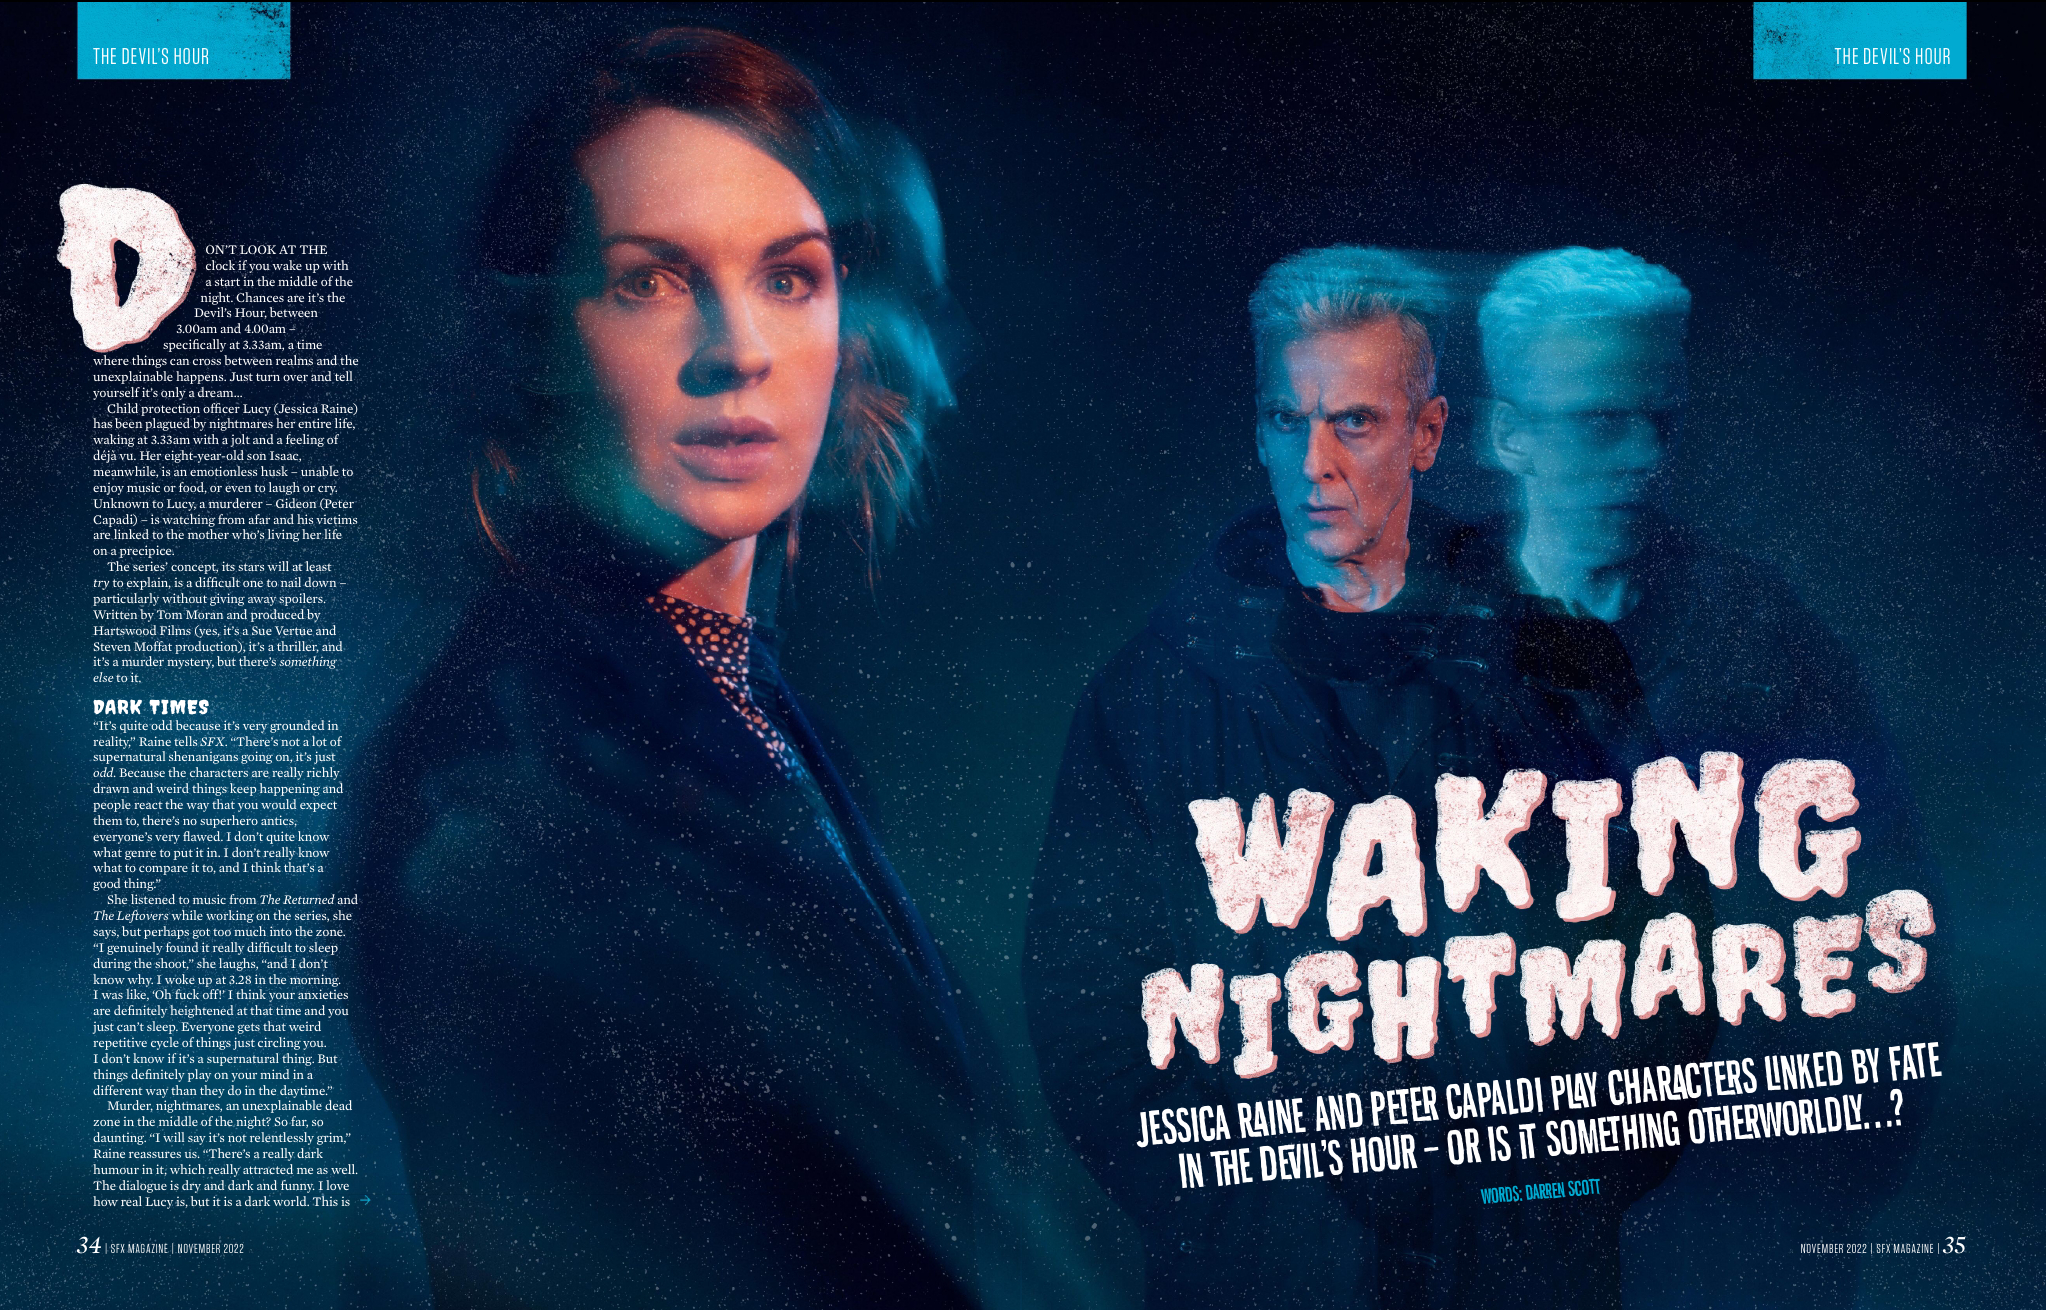 An alarmed Jessica Raine and a sinister-looking Peter Capaldi.